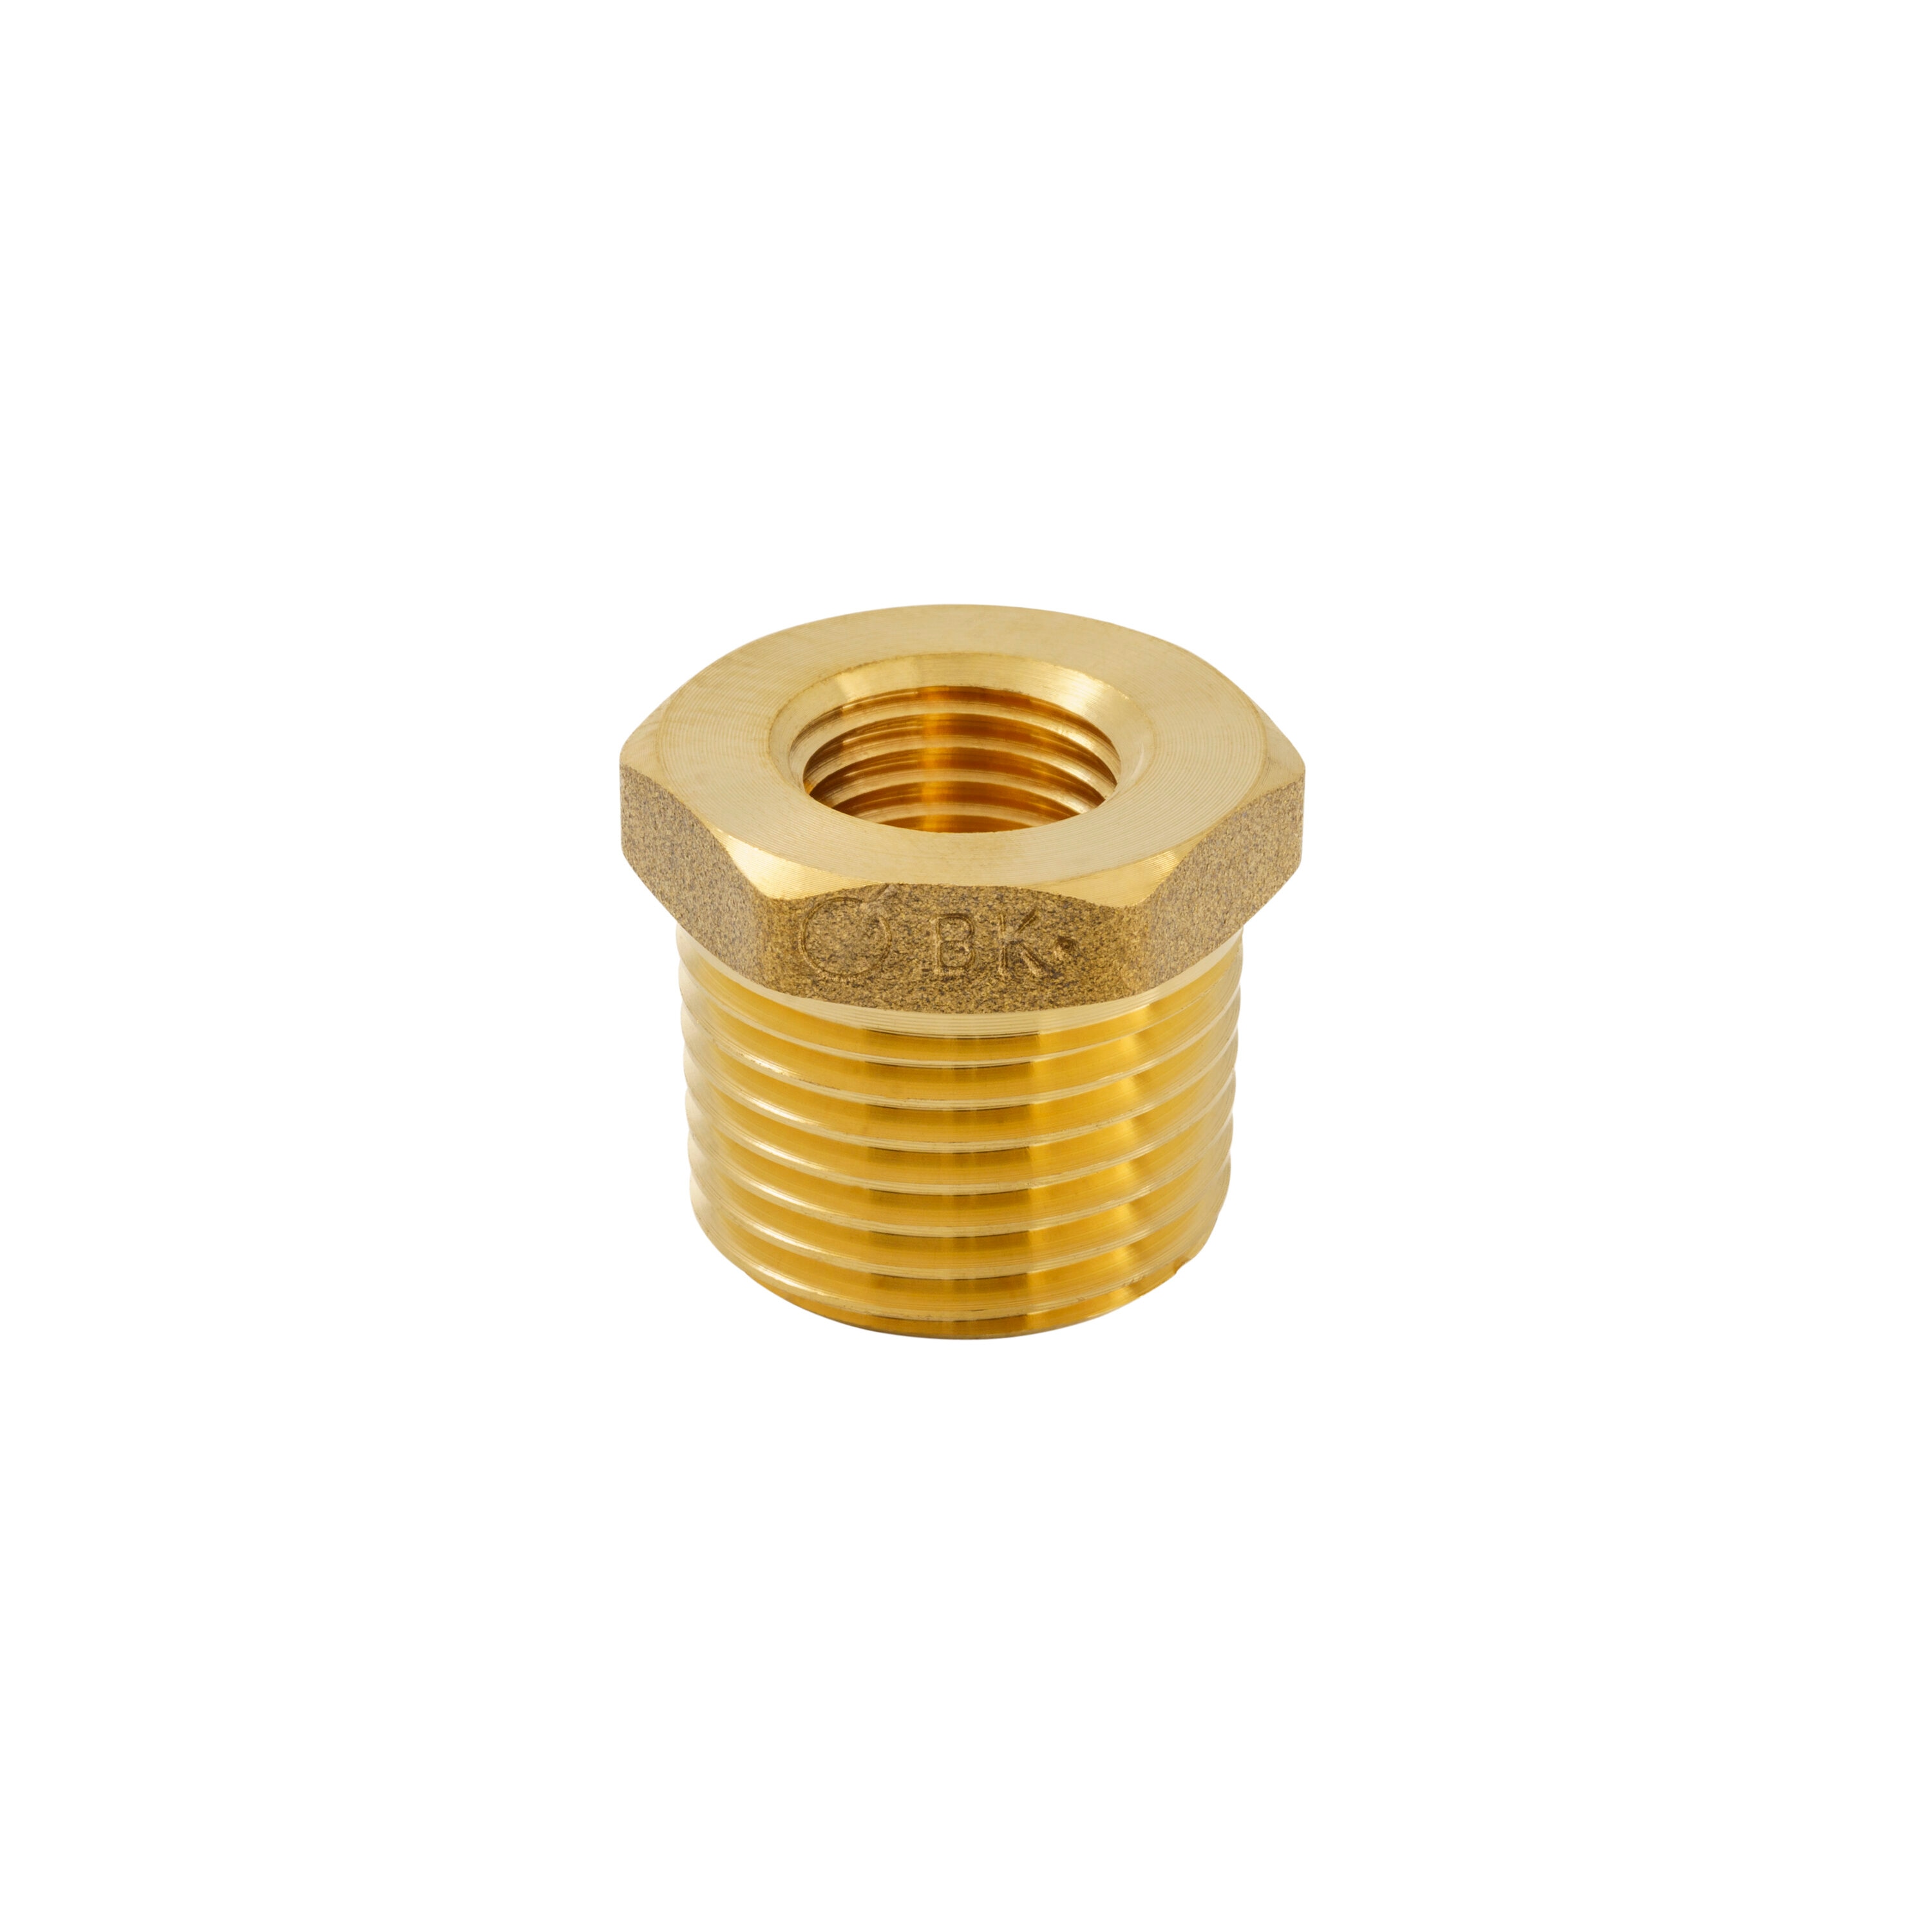 B&K 1/2-in Threaded Male Adapter Bushing Fitting in Gold | BF-827NLB